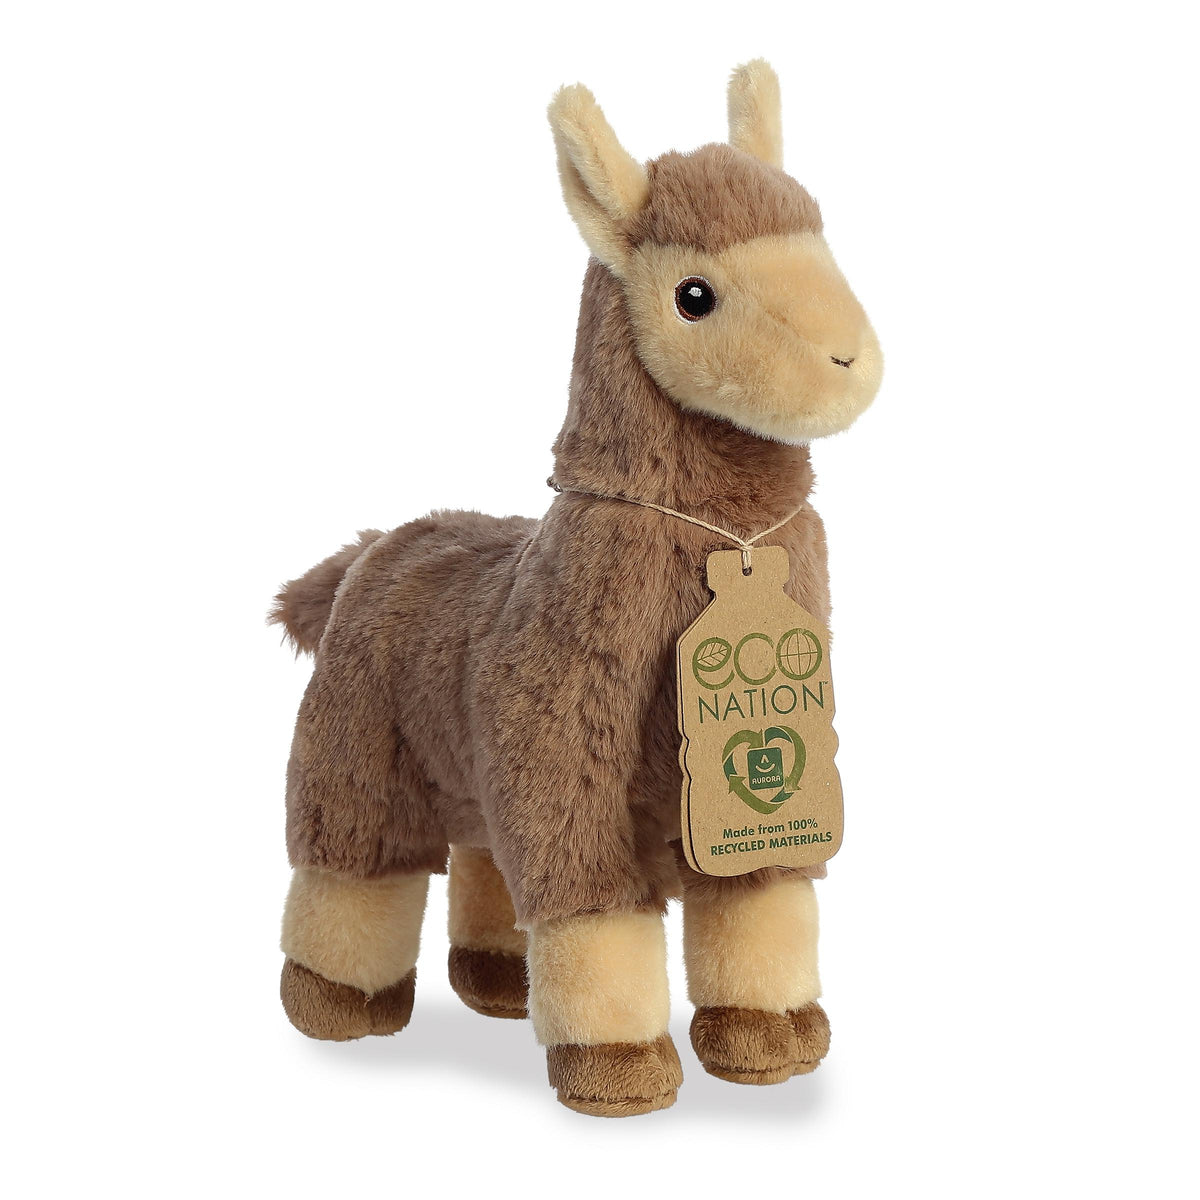 A winsome tan llama plush with a beautiful tan coating, cute embroidered eyes, and an eco-nation tag by its neck